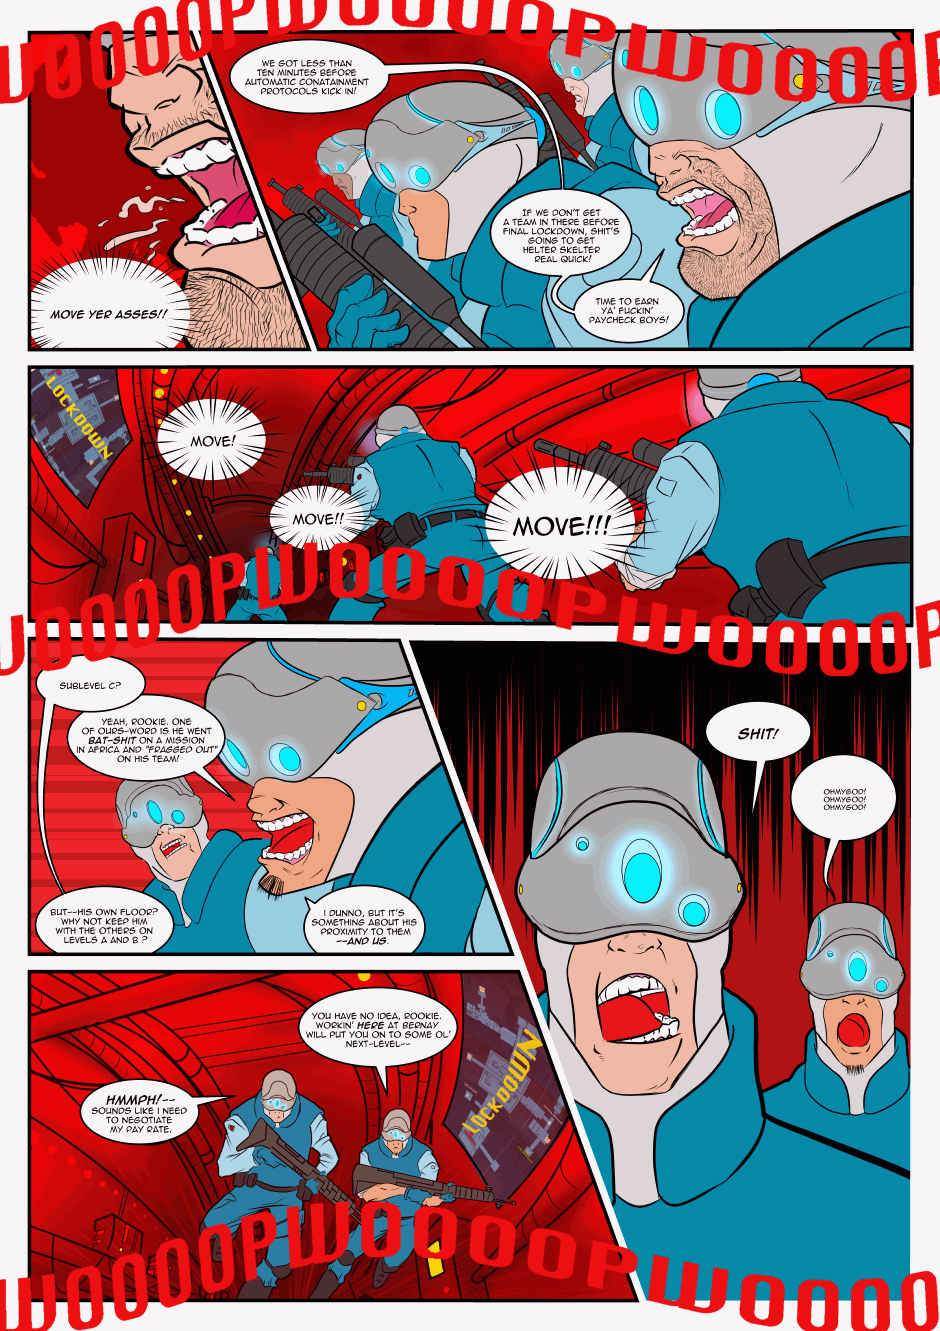 Pg. 3: Move 'Yer Asses!